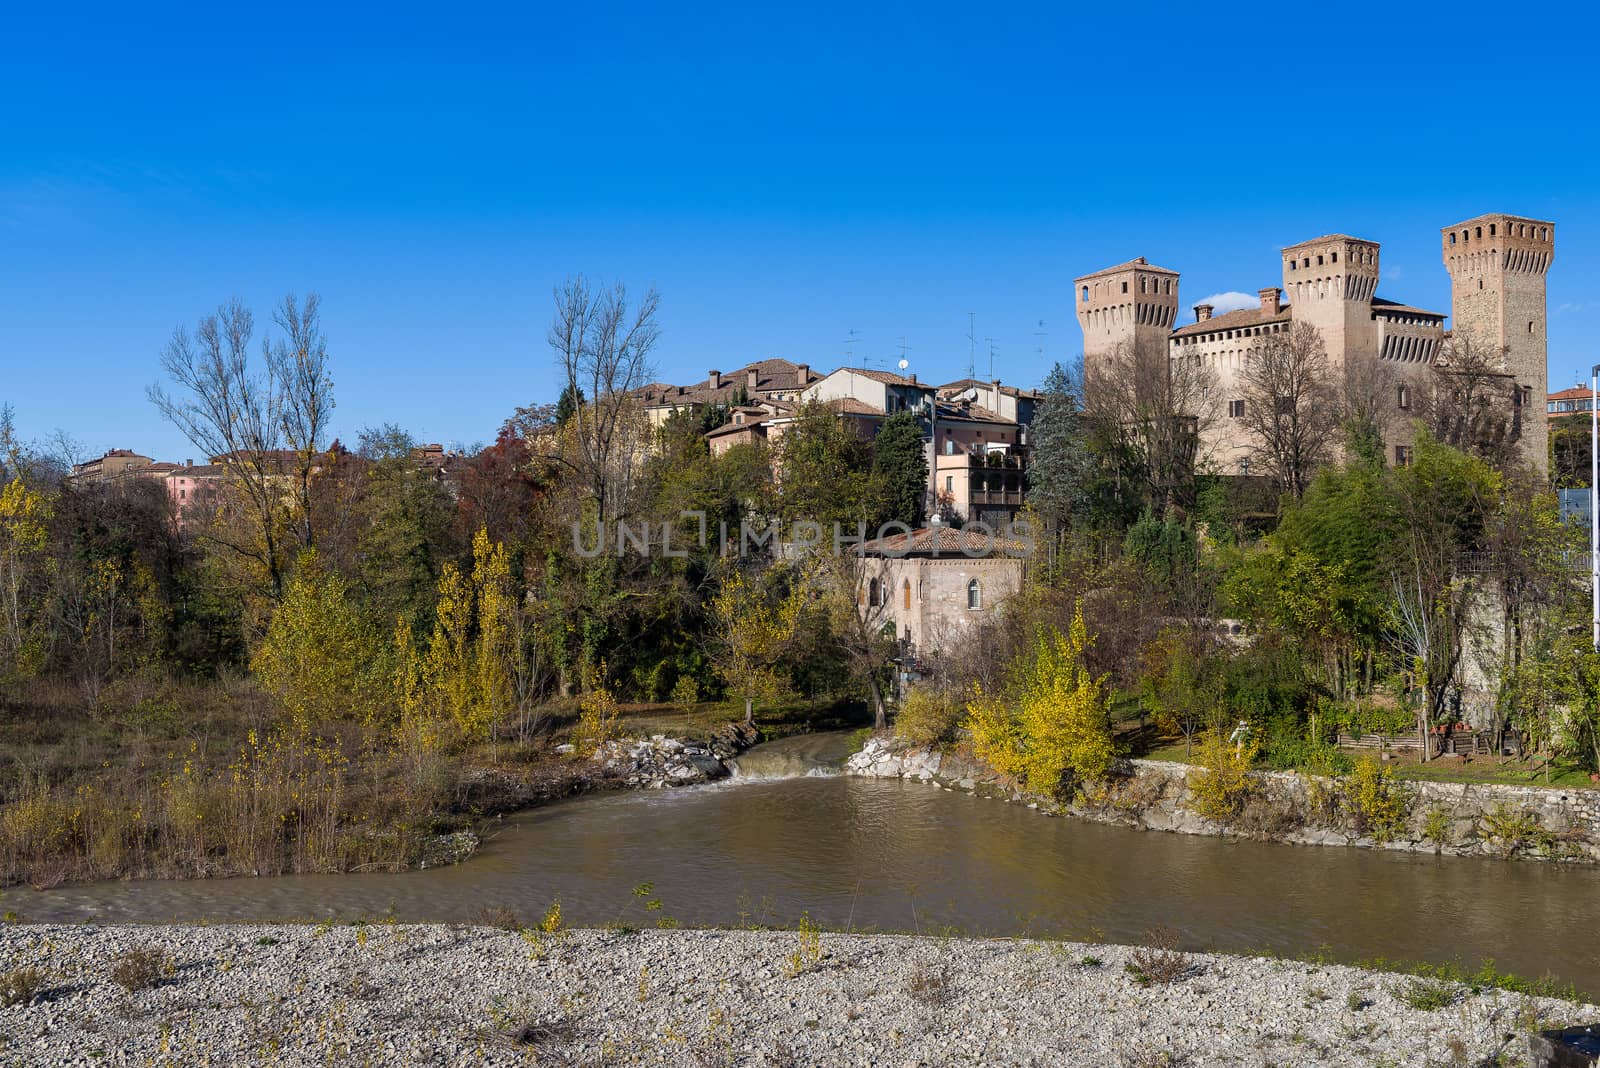 Ancient medieval castle situated in Vignola, near